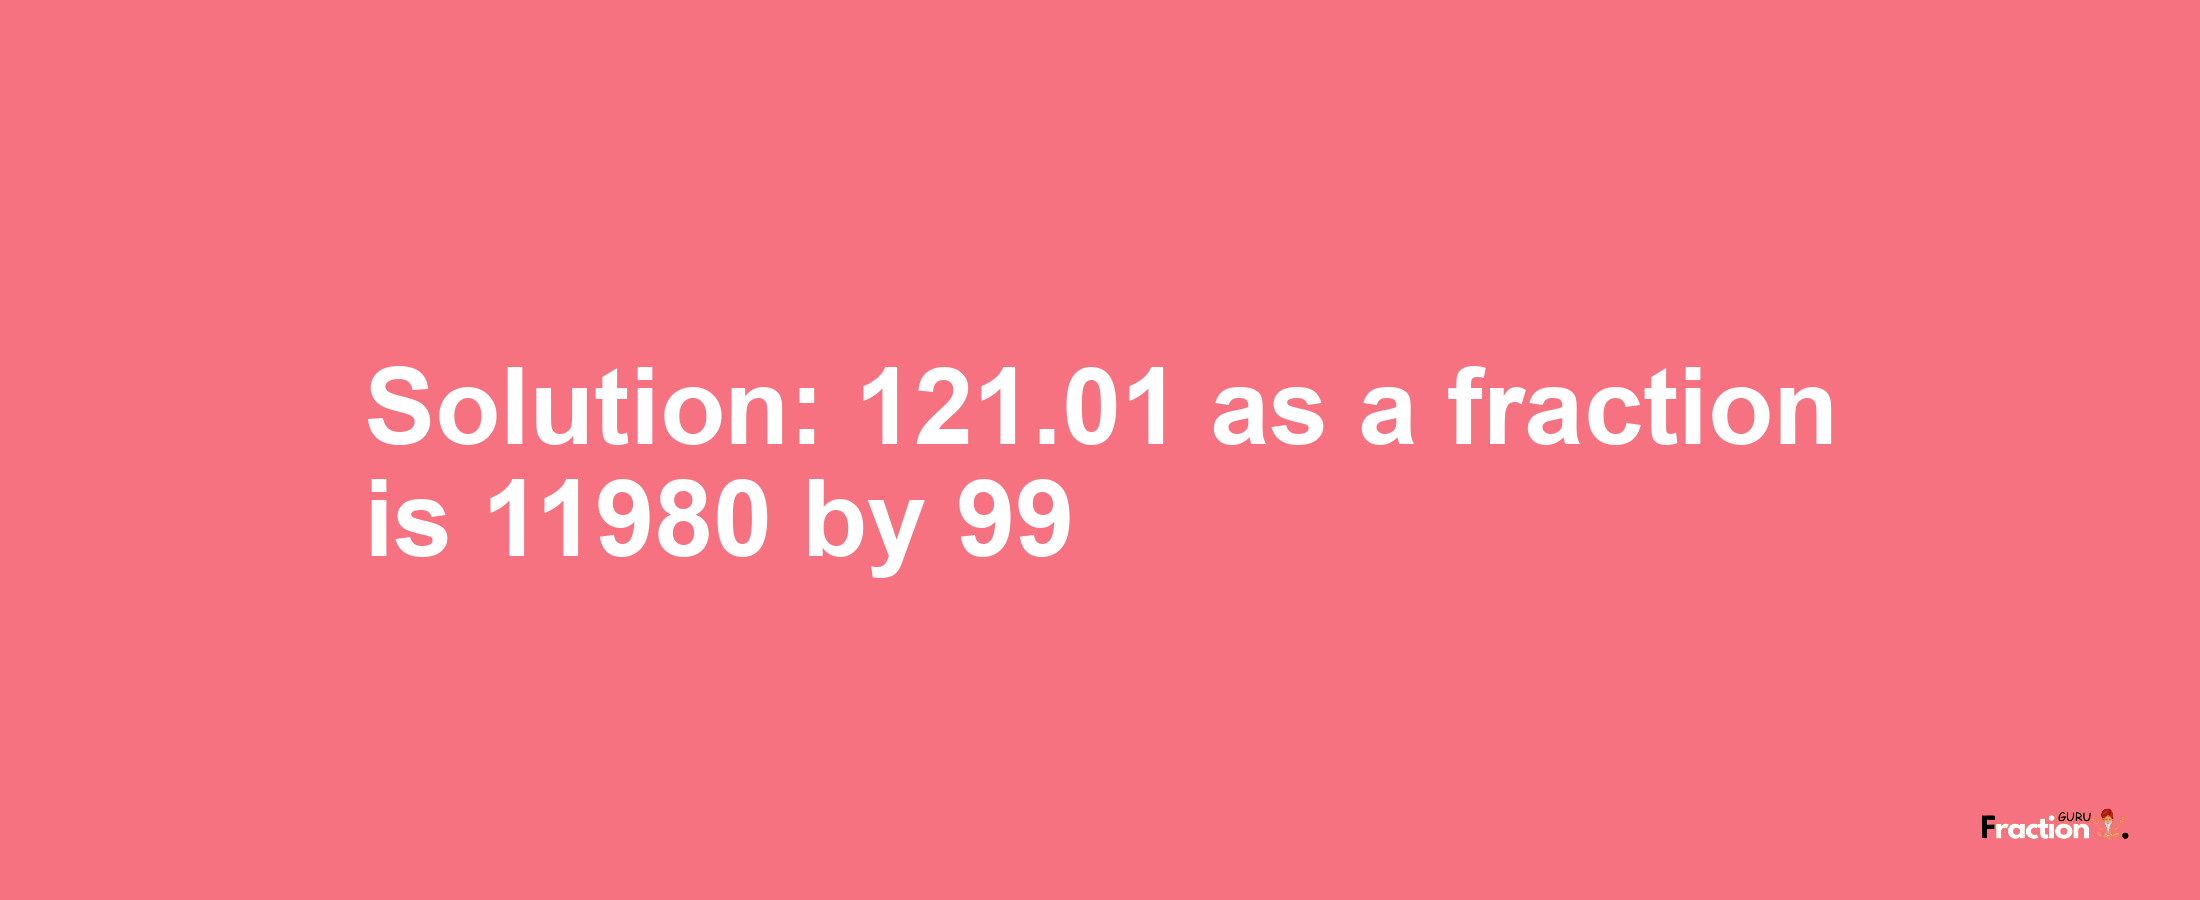 Solution:121.01 as a fraction is 11980/99